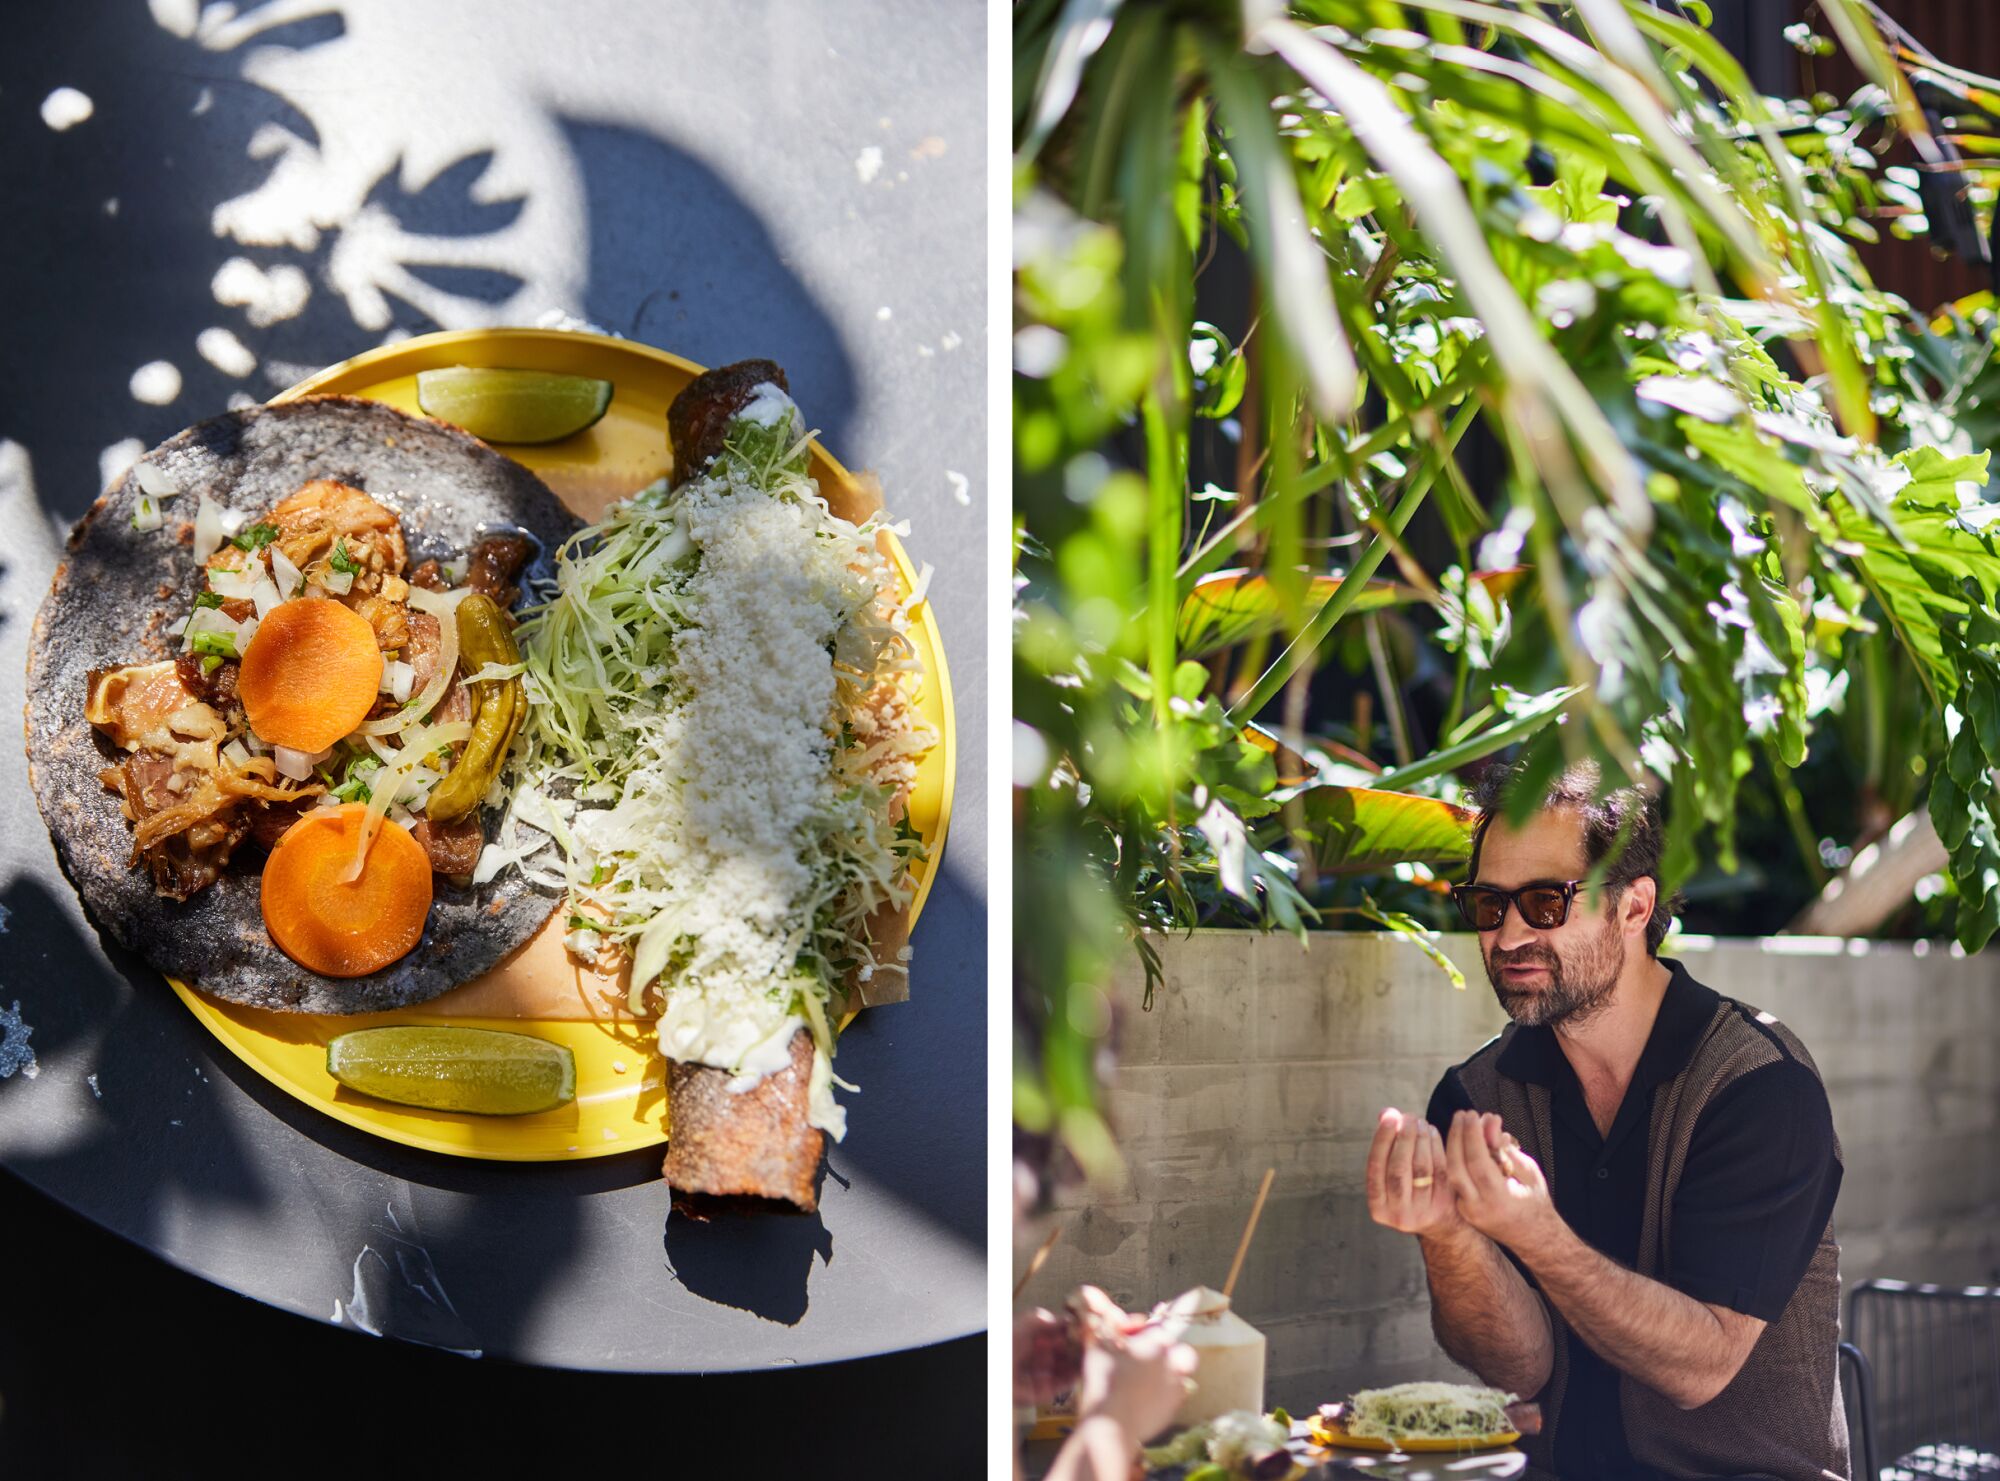 Two photos: food on a yellow plate and Manuel Garcia-Rulfo seated outdoors, partially obscured by greenery.